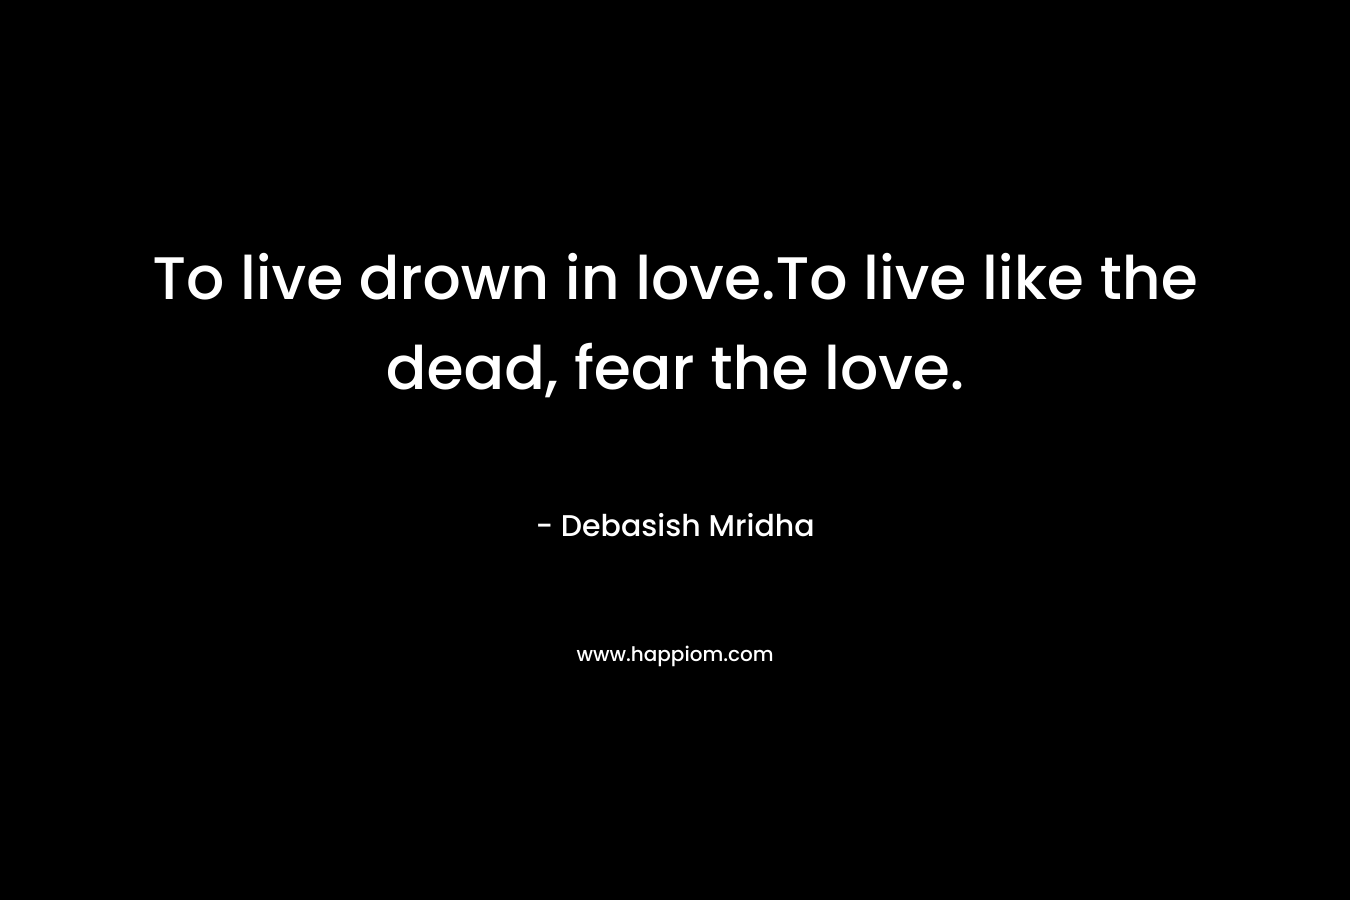 To live drown in love.To live like the dead, fear the love.